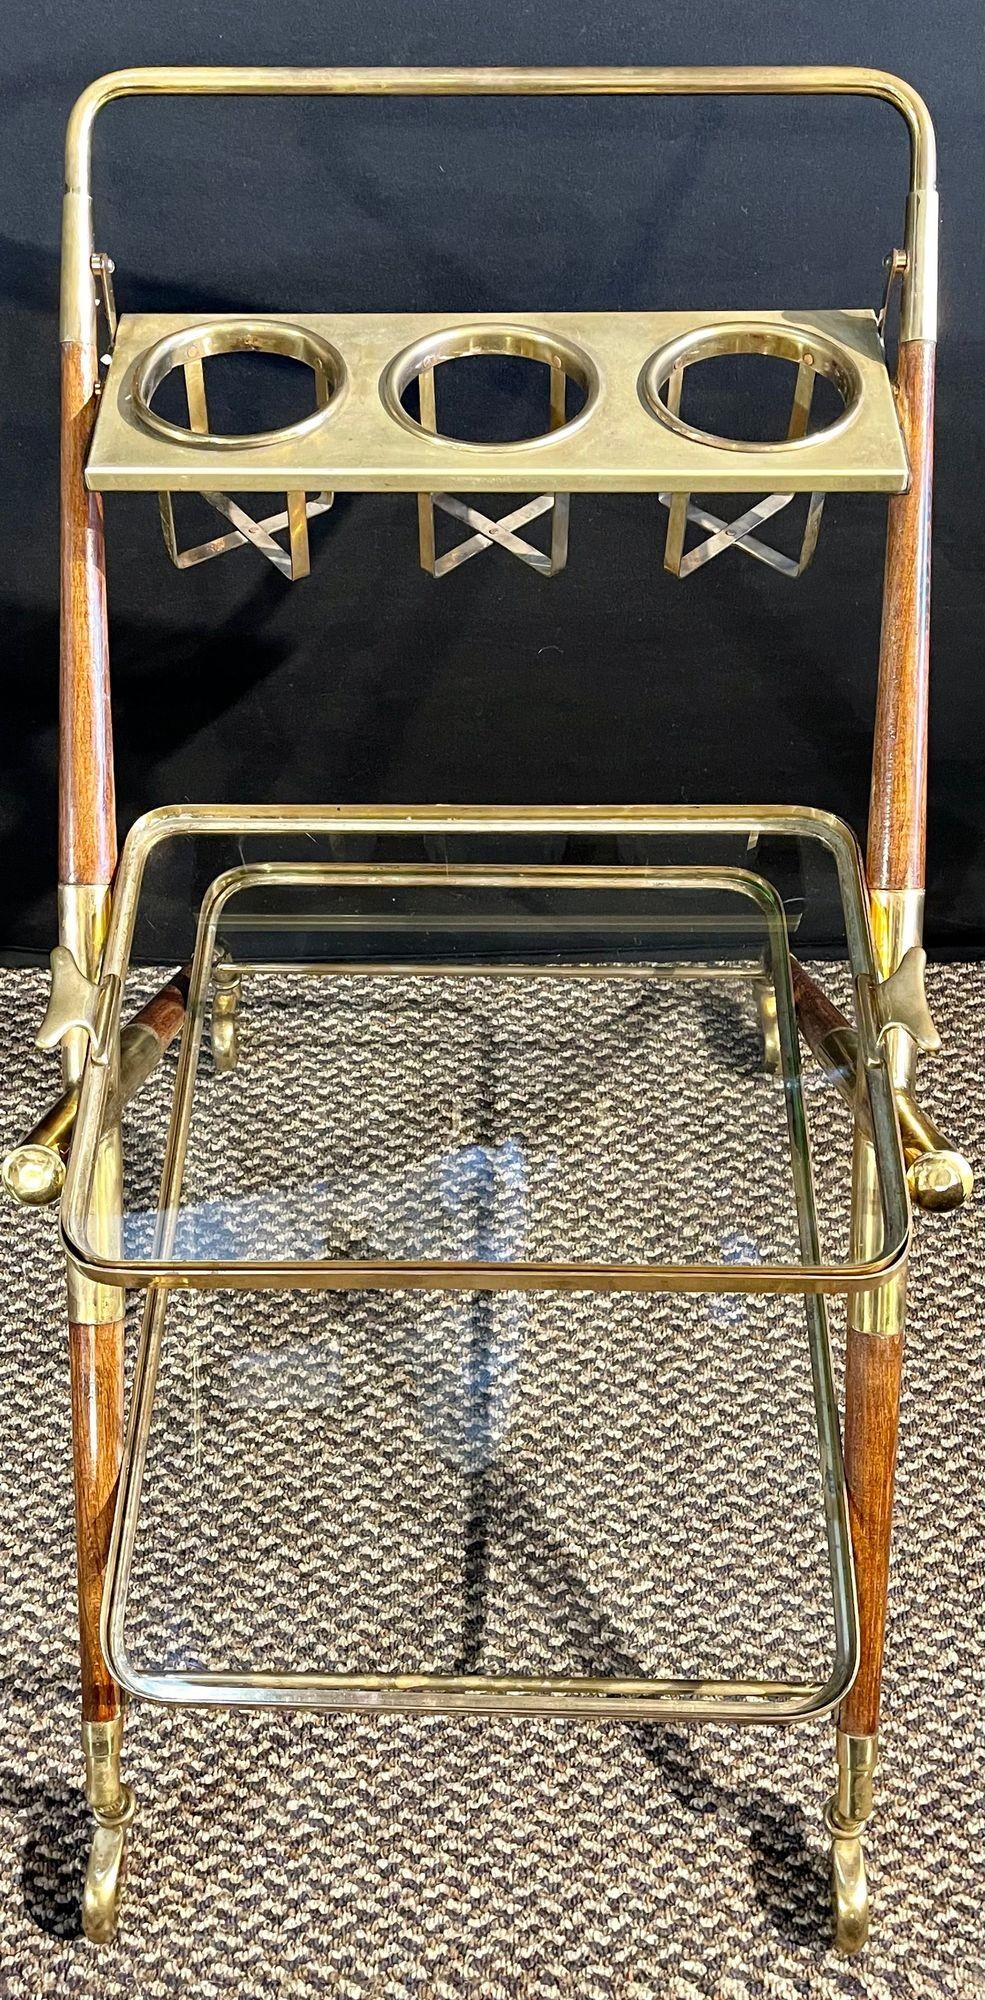 Mid-Century Modern bar cart. Teak and brass bar cart or serving cart with bottle holders and glass holders as well as glass shelving.